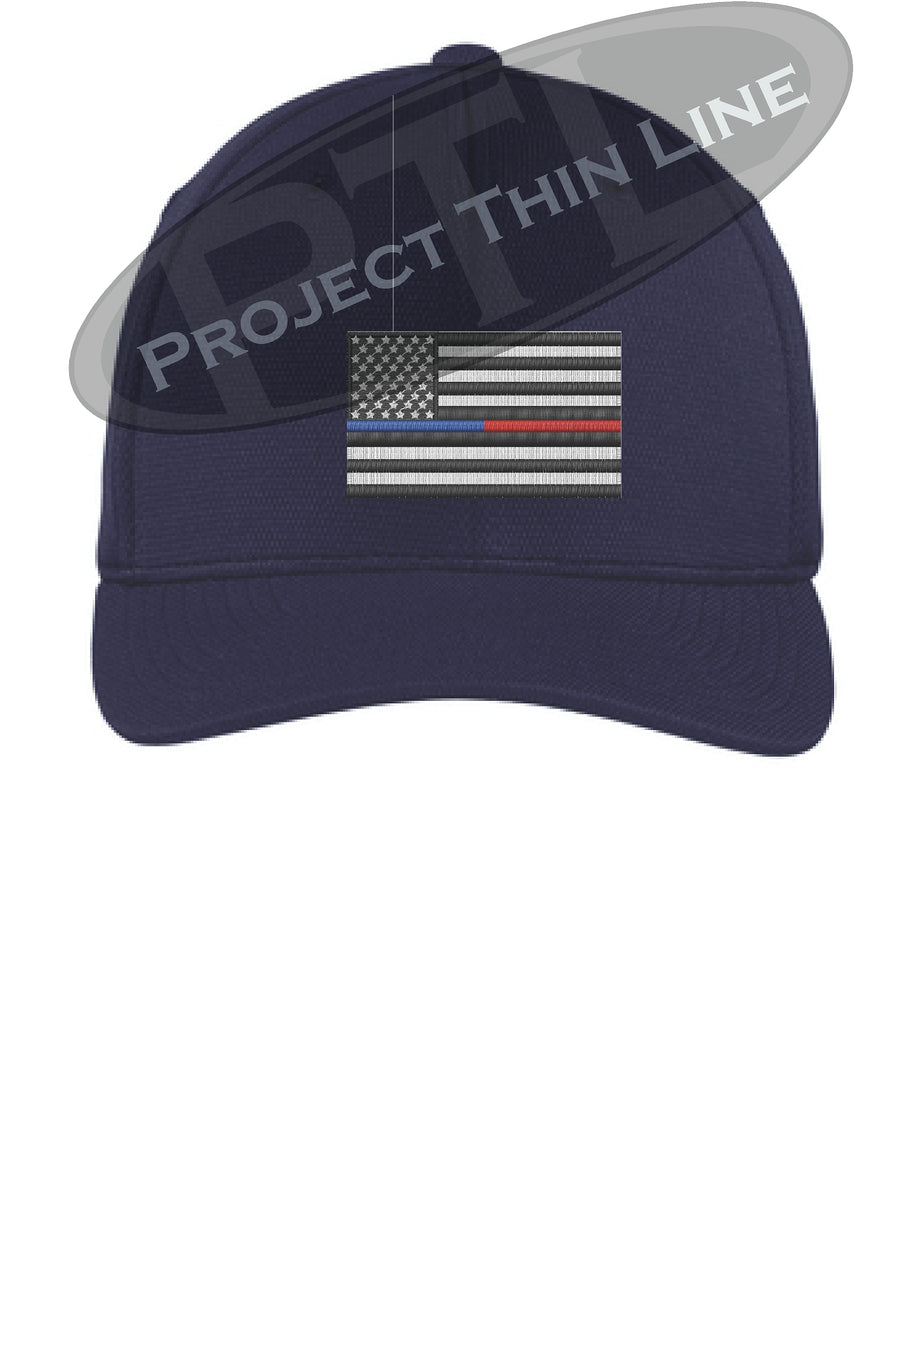 Black Embroidered Thin Blue / Red Line American Flag Flex Fit Hat